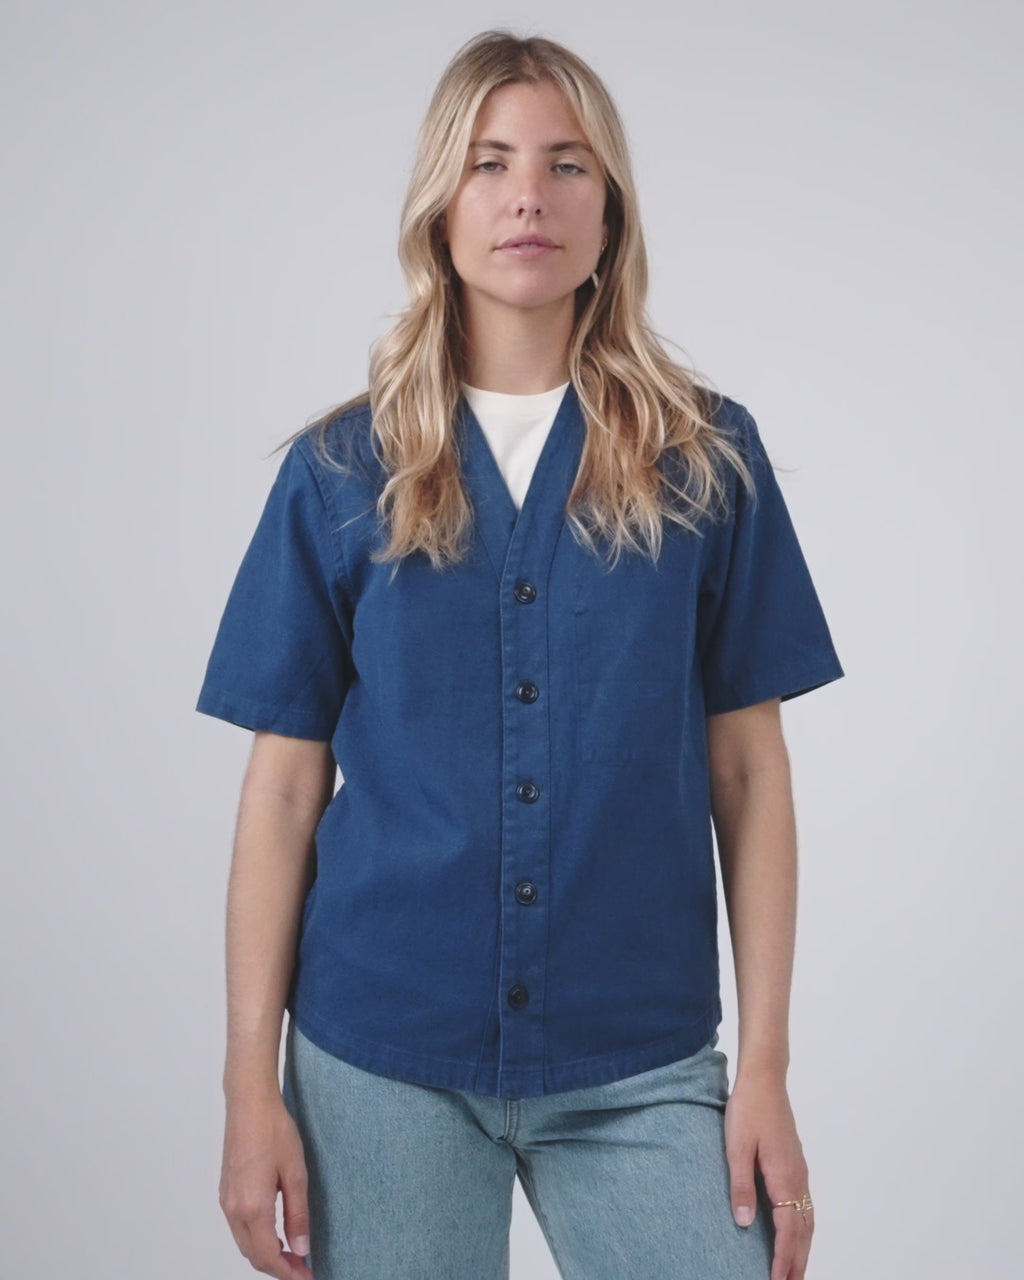 Imperfects - The Benny Jersey in Vintage Blue Hemp - Womens